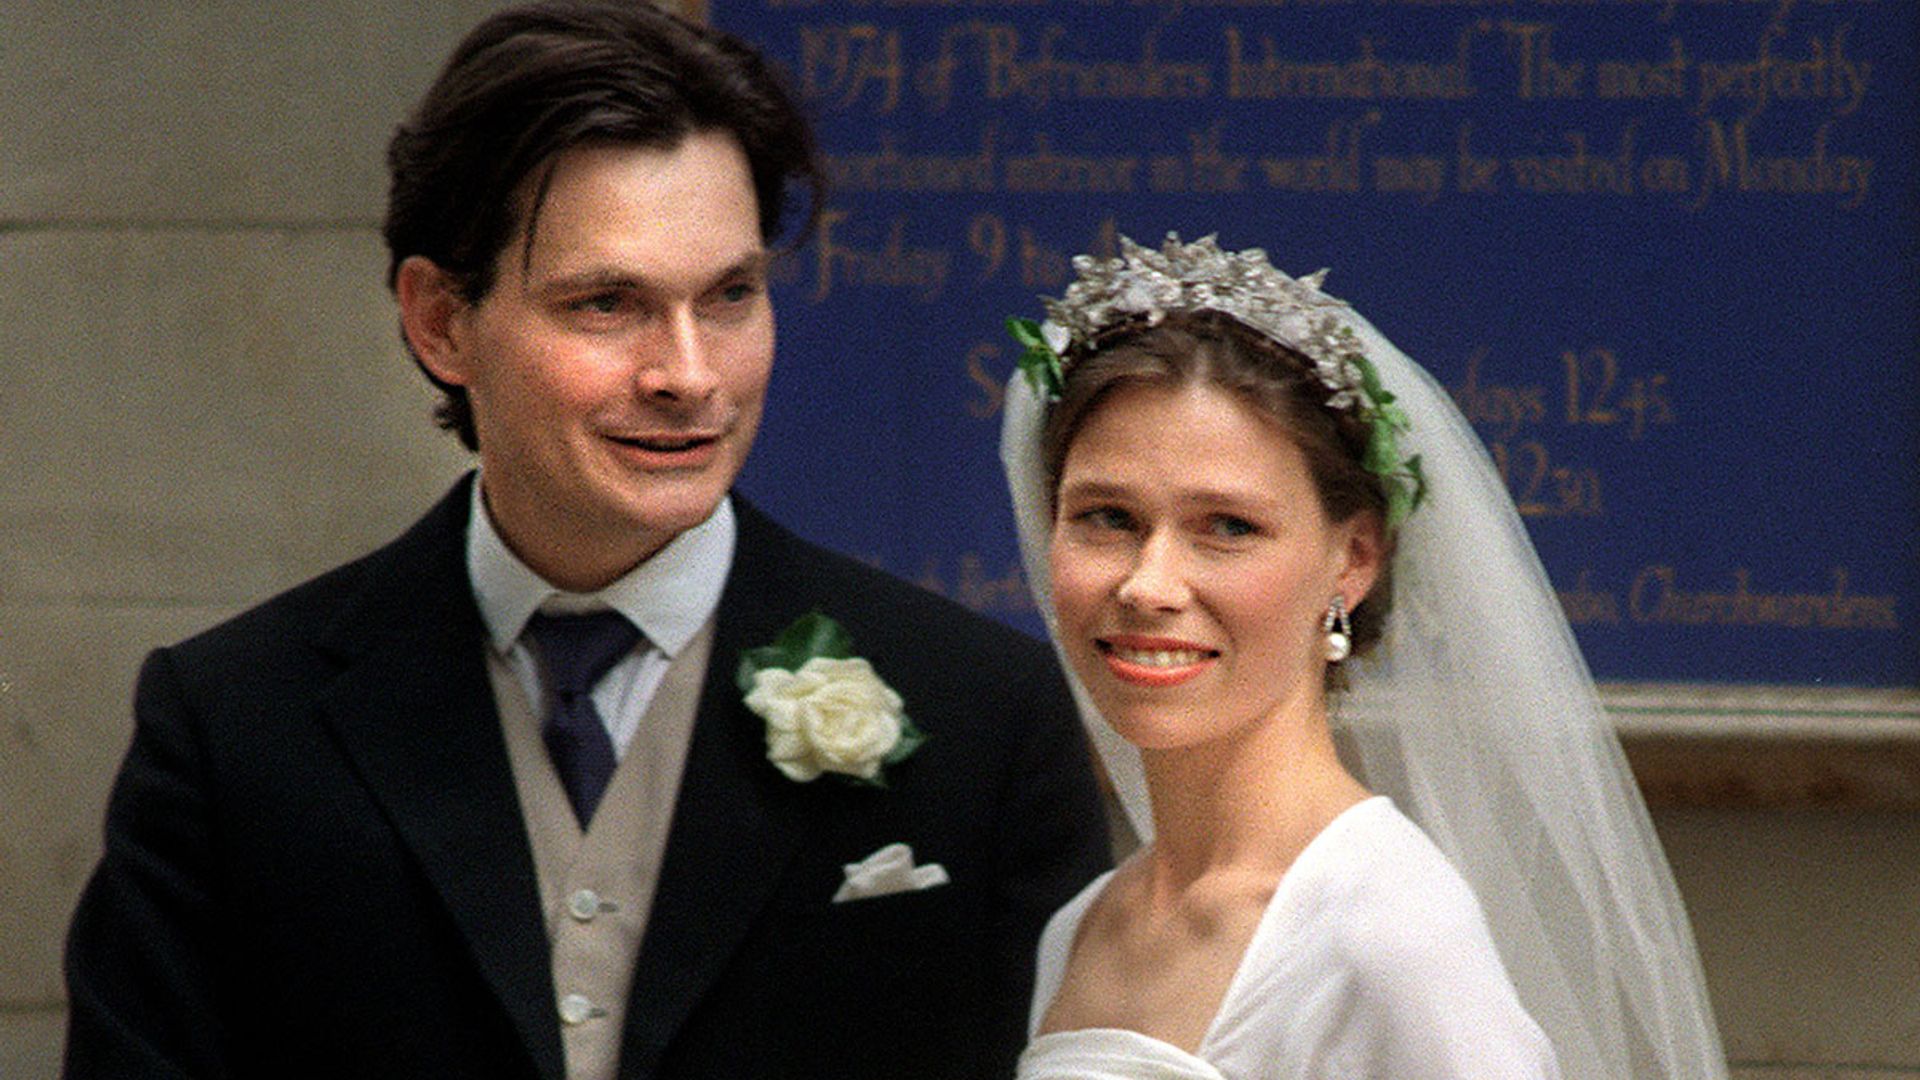 Lady Sarah Chatto looks stunning in unearthed wedding day photo